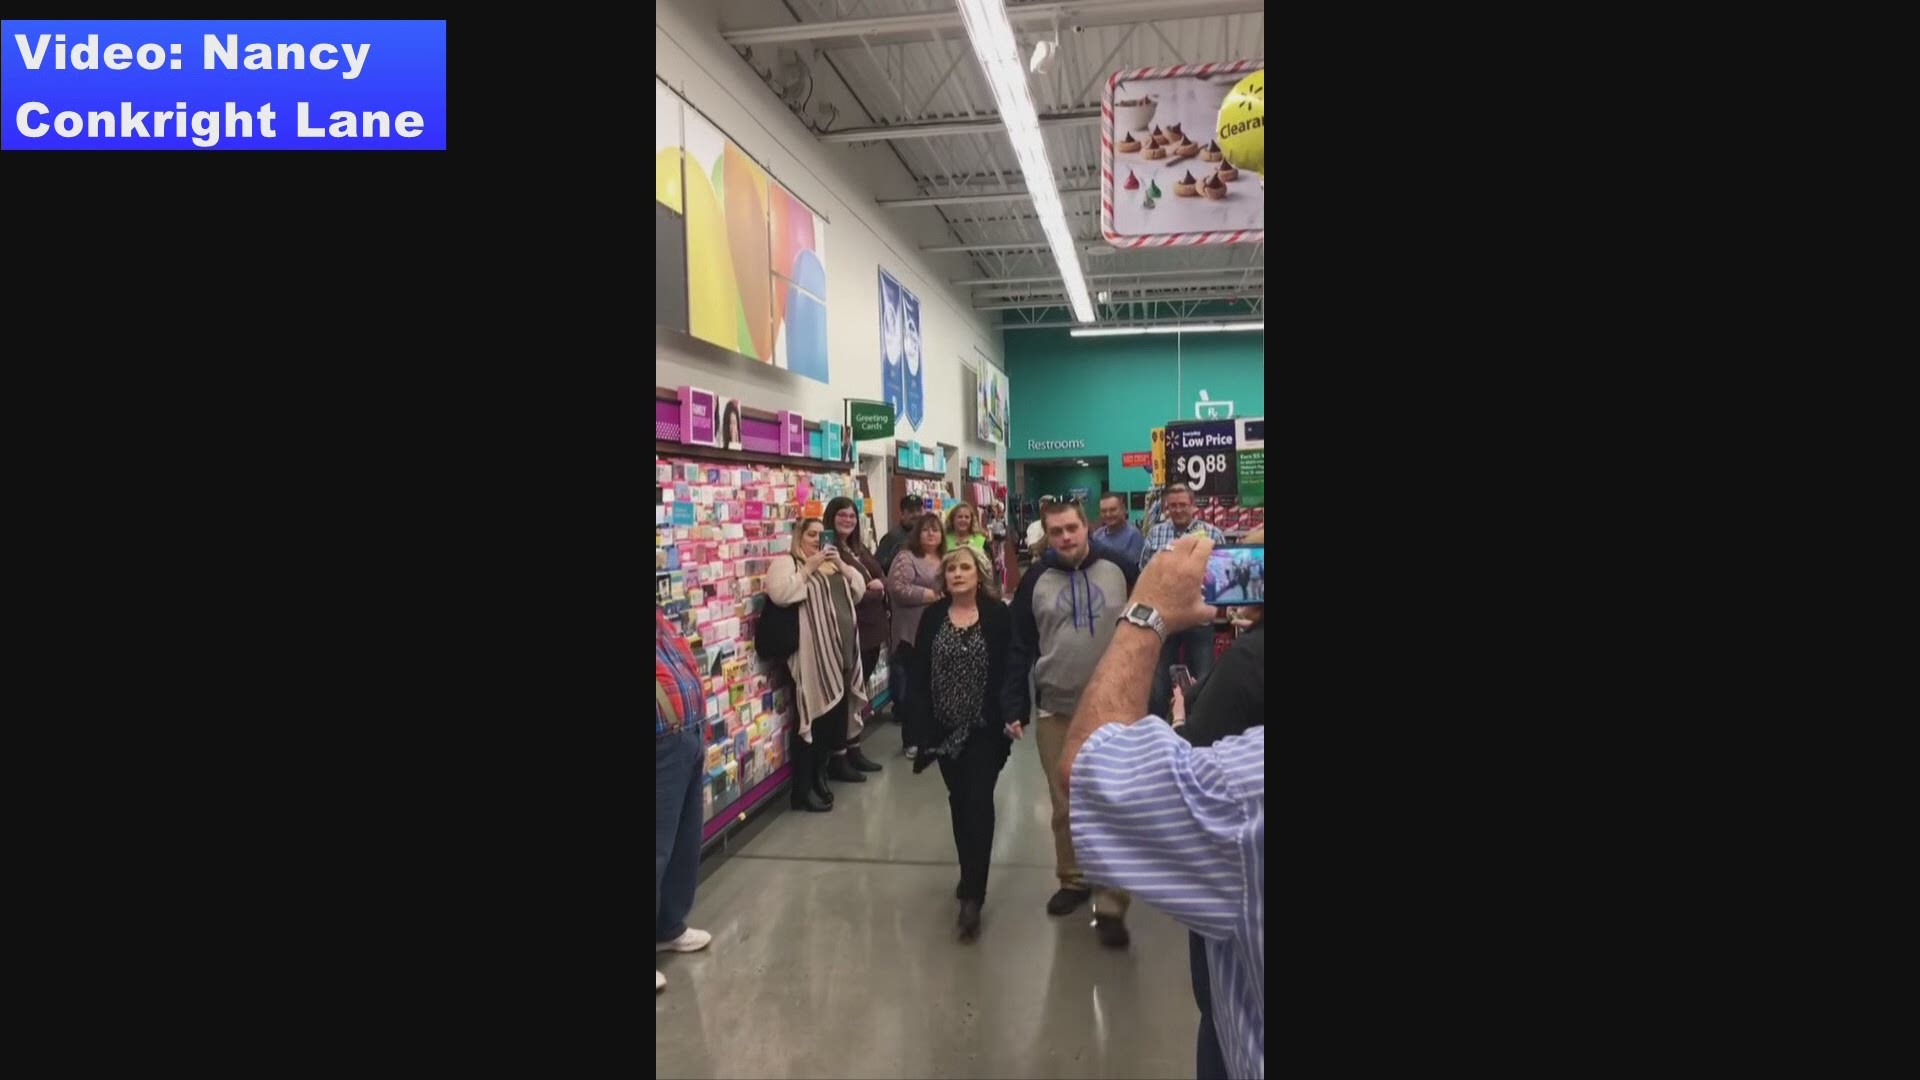 Love was on display at this Sevierville Walmart, where what started out as a sort-of workplace joke became the real deal for two workers in love: A Walmart Wedding.